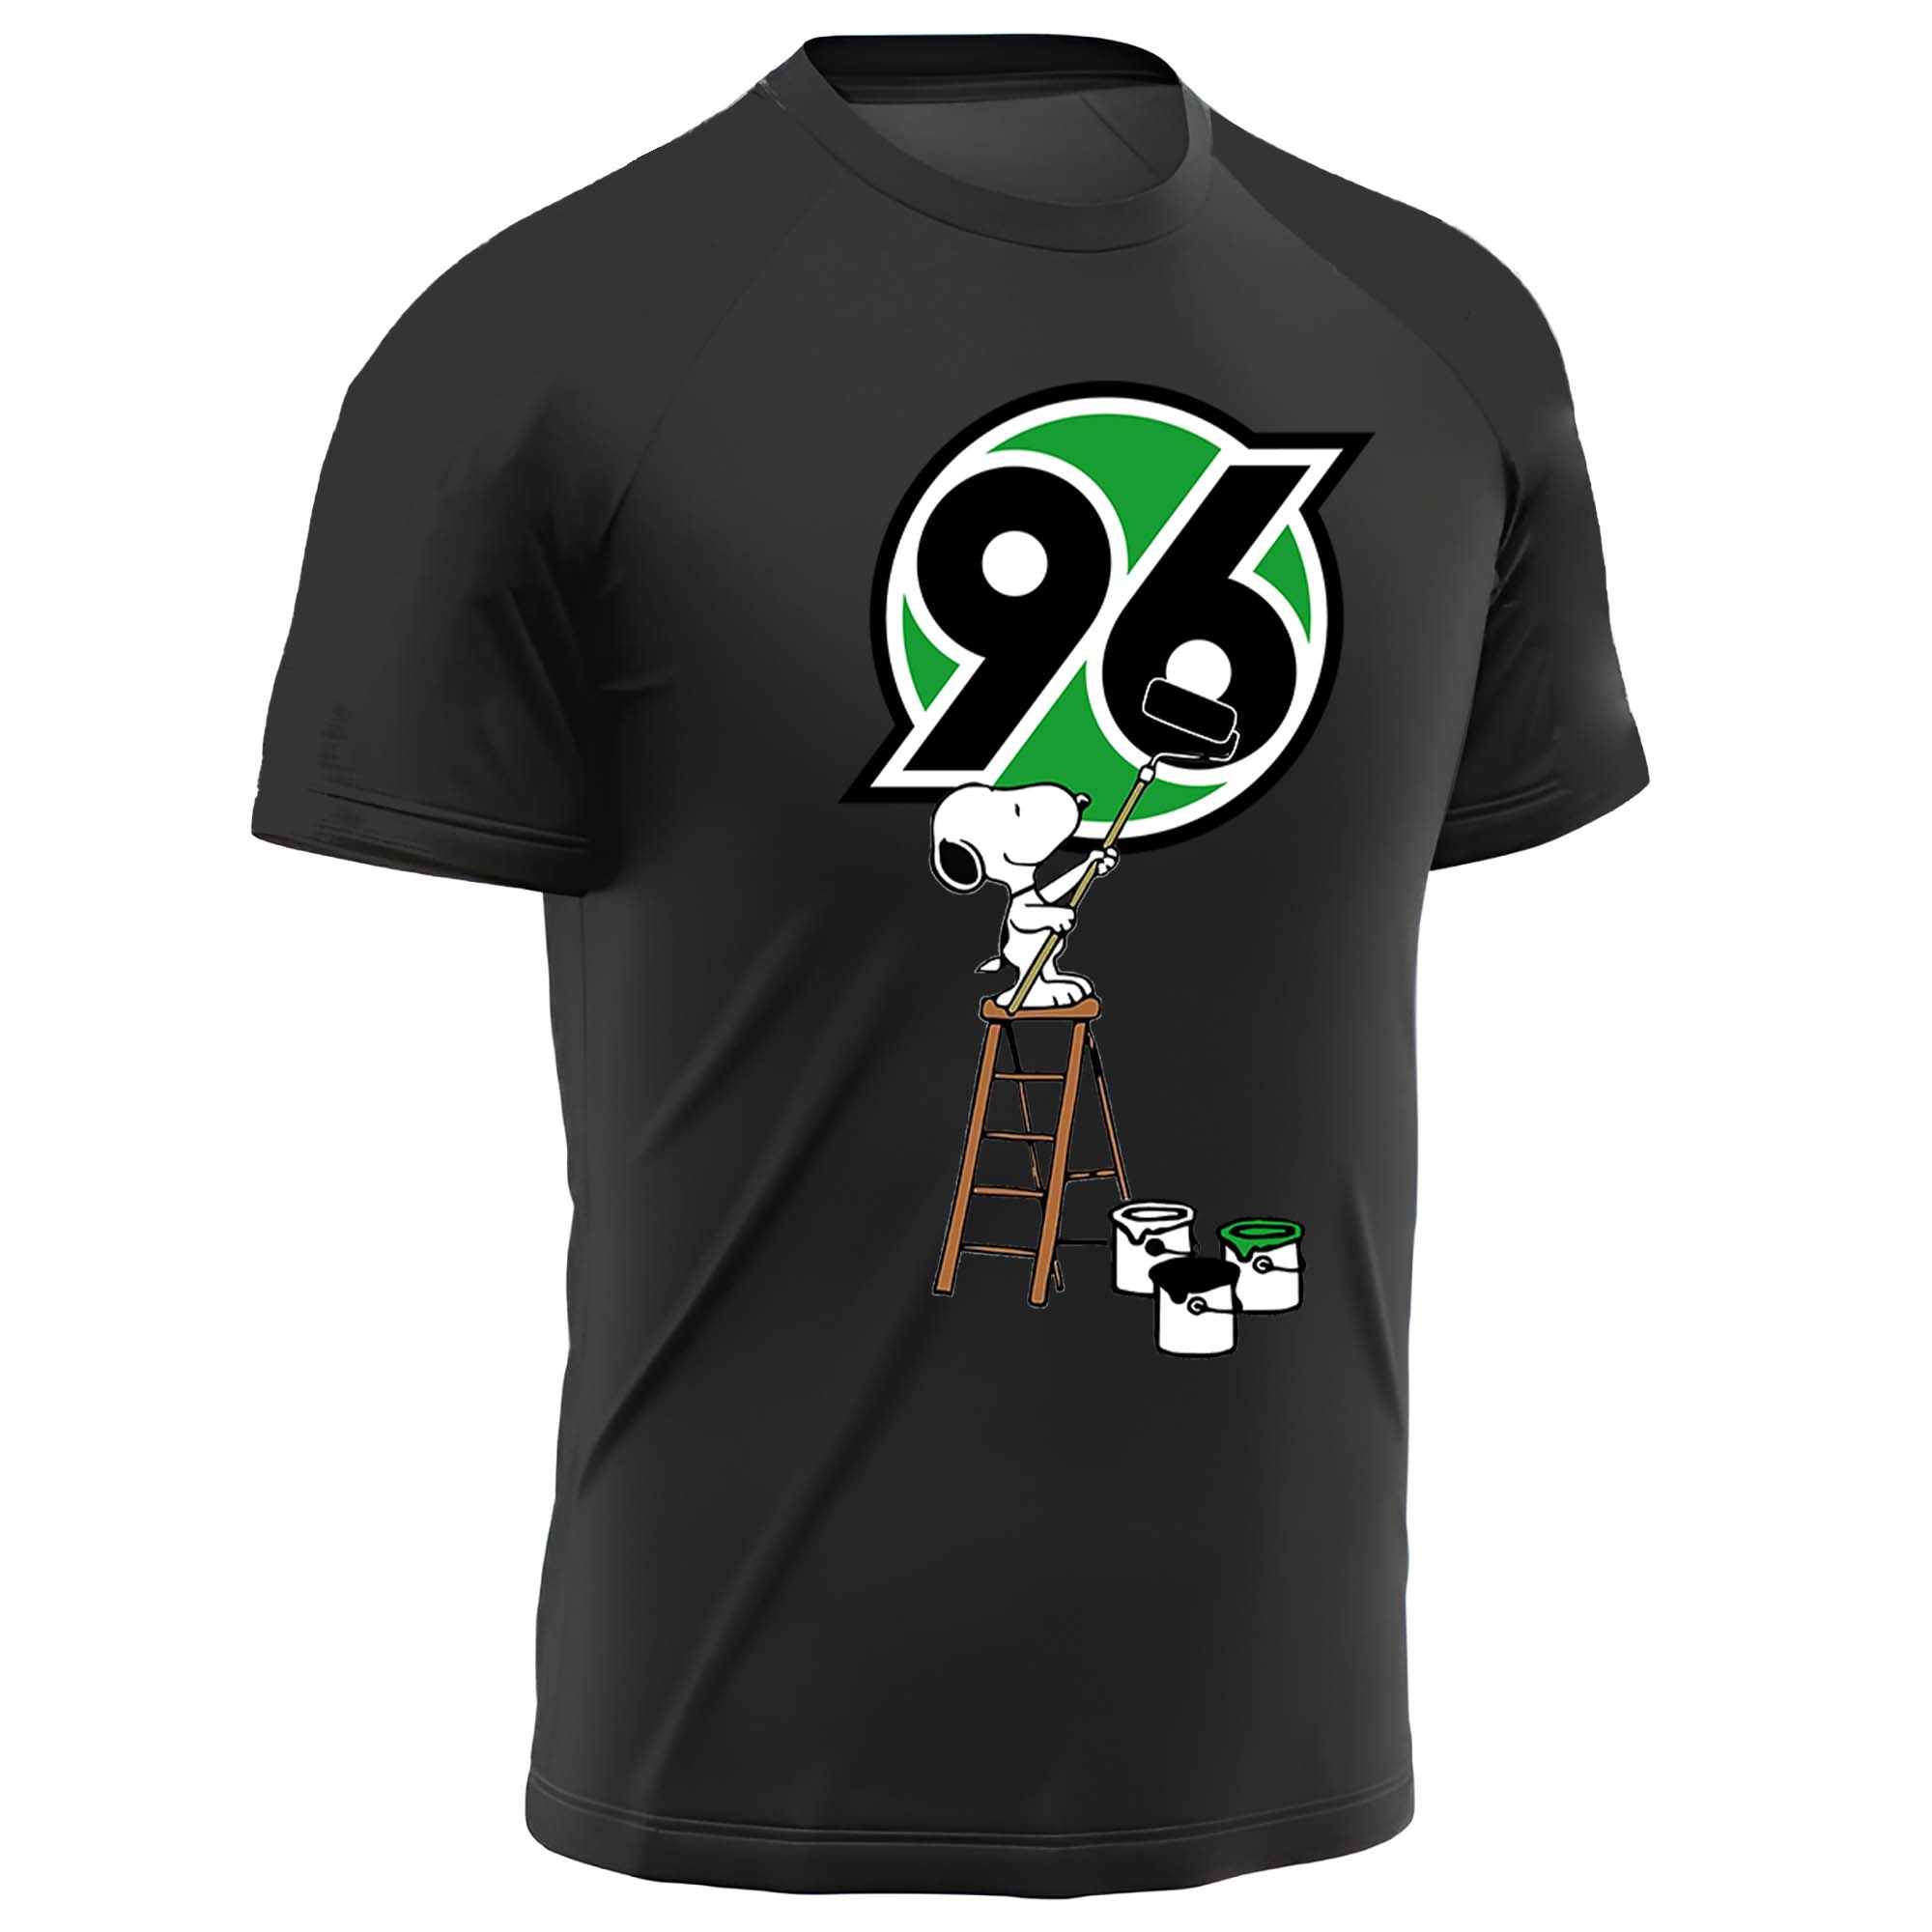 Hannover 96 Mix Snoopy Shirt PT54901